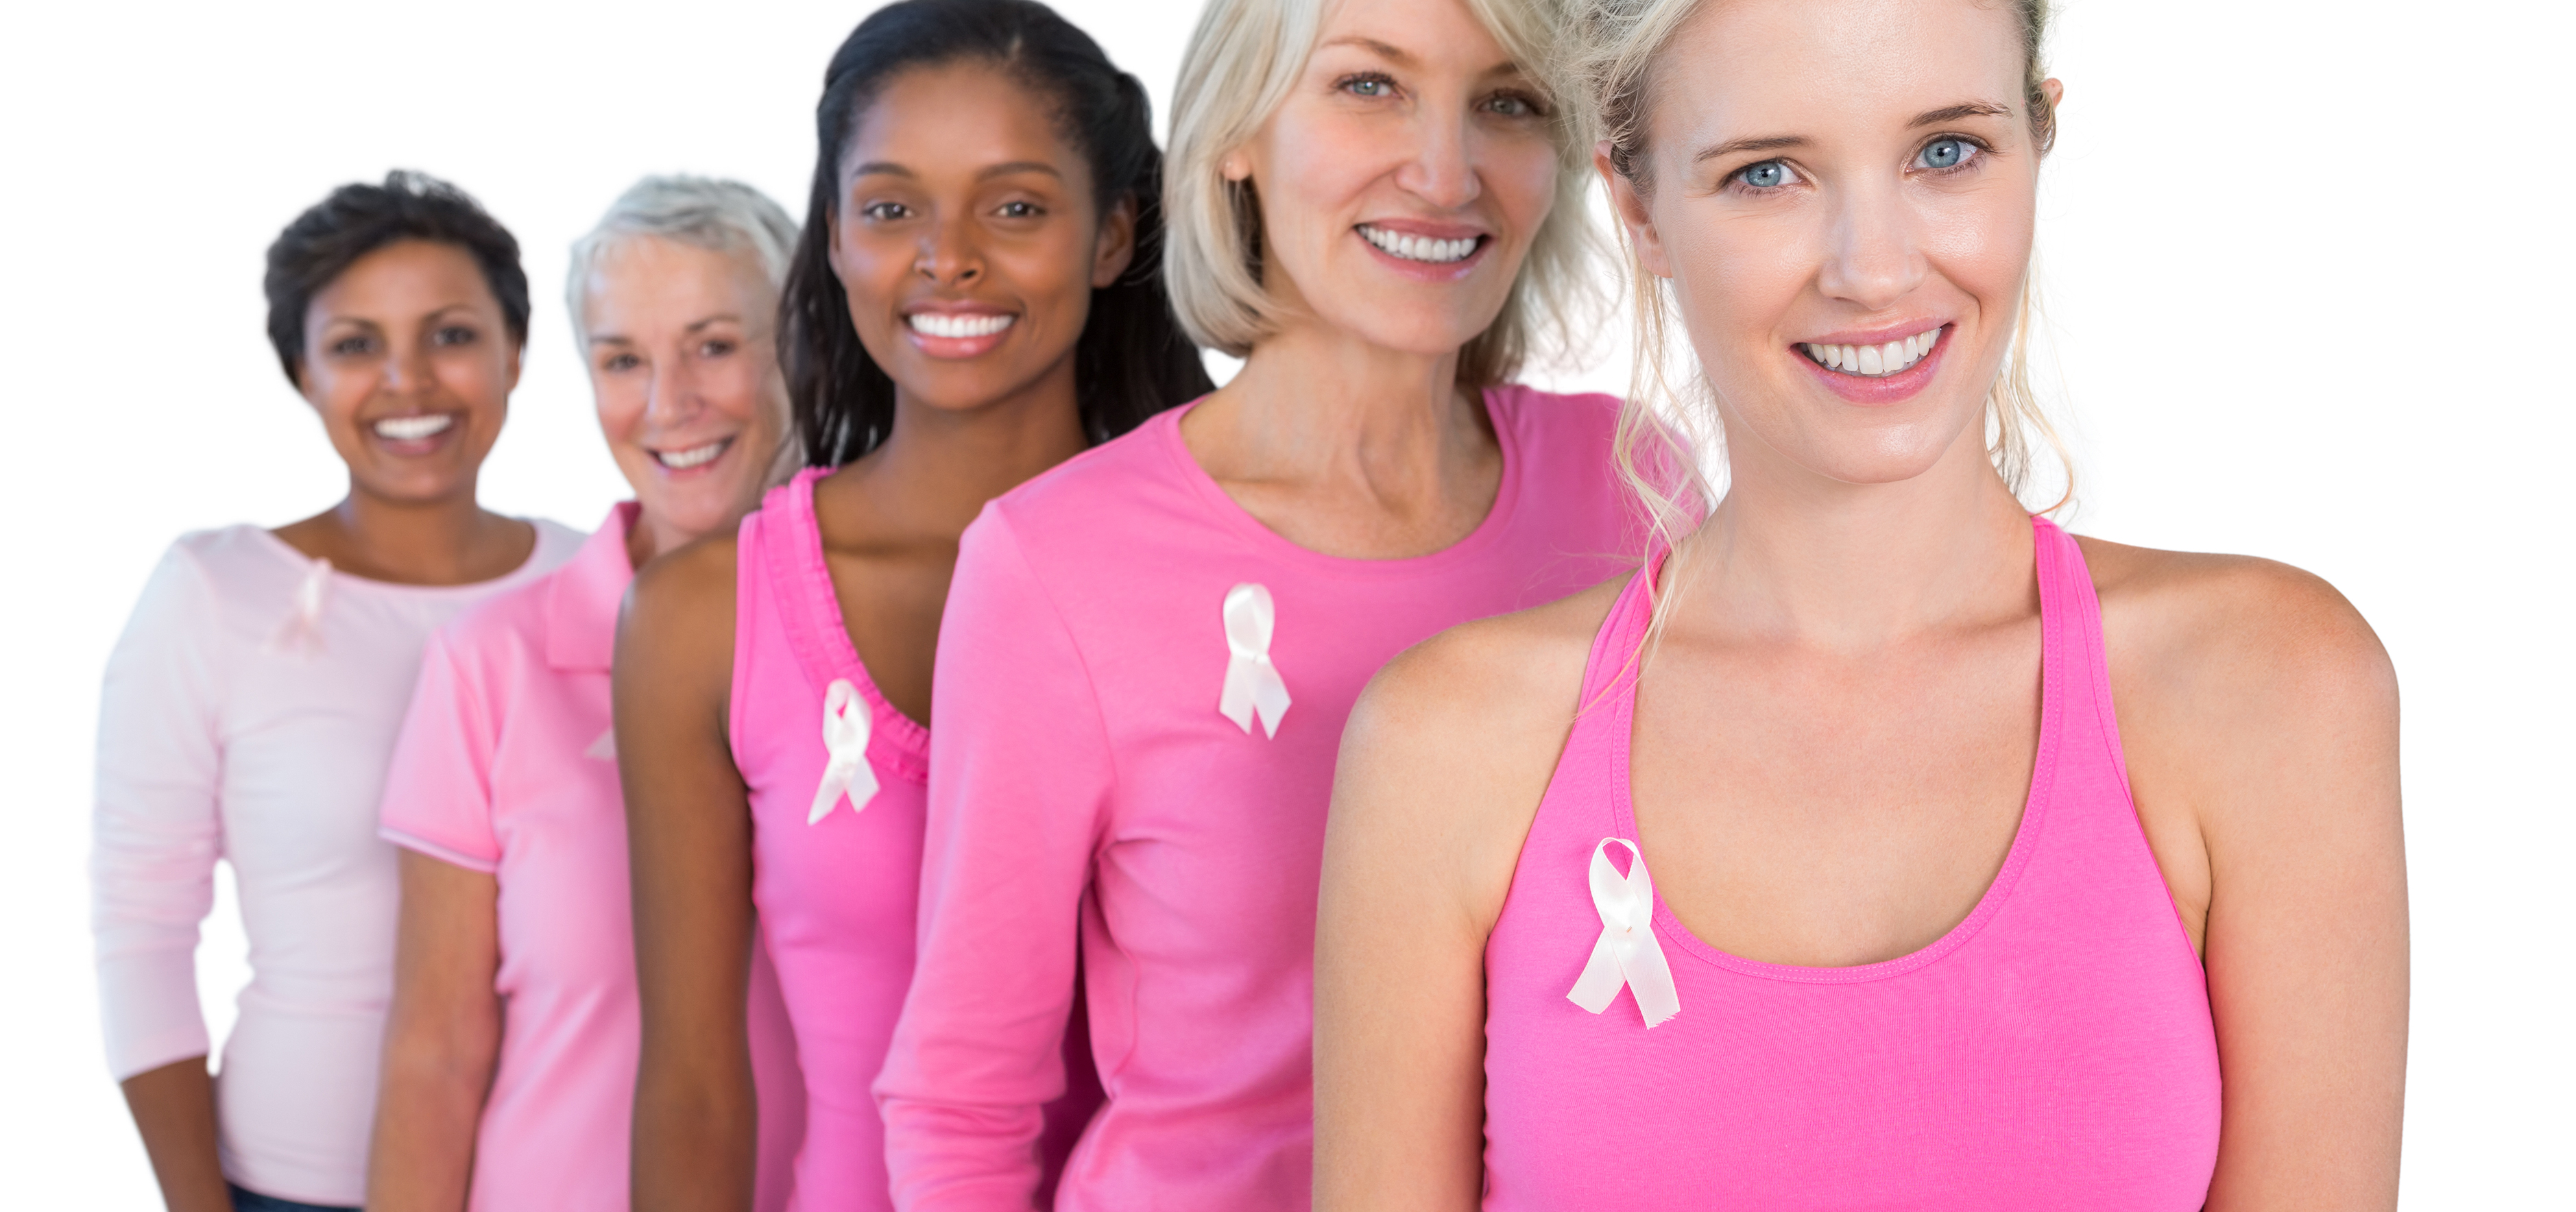 Women promoting breast cancer awareness